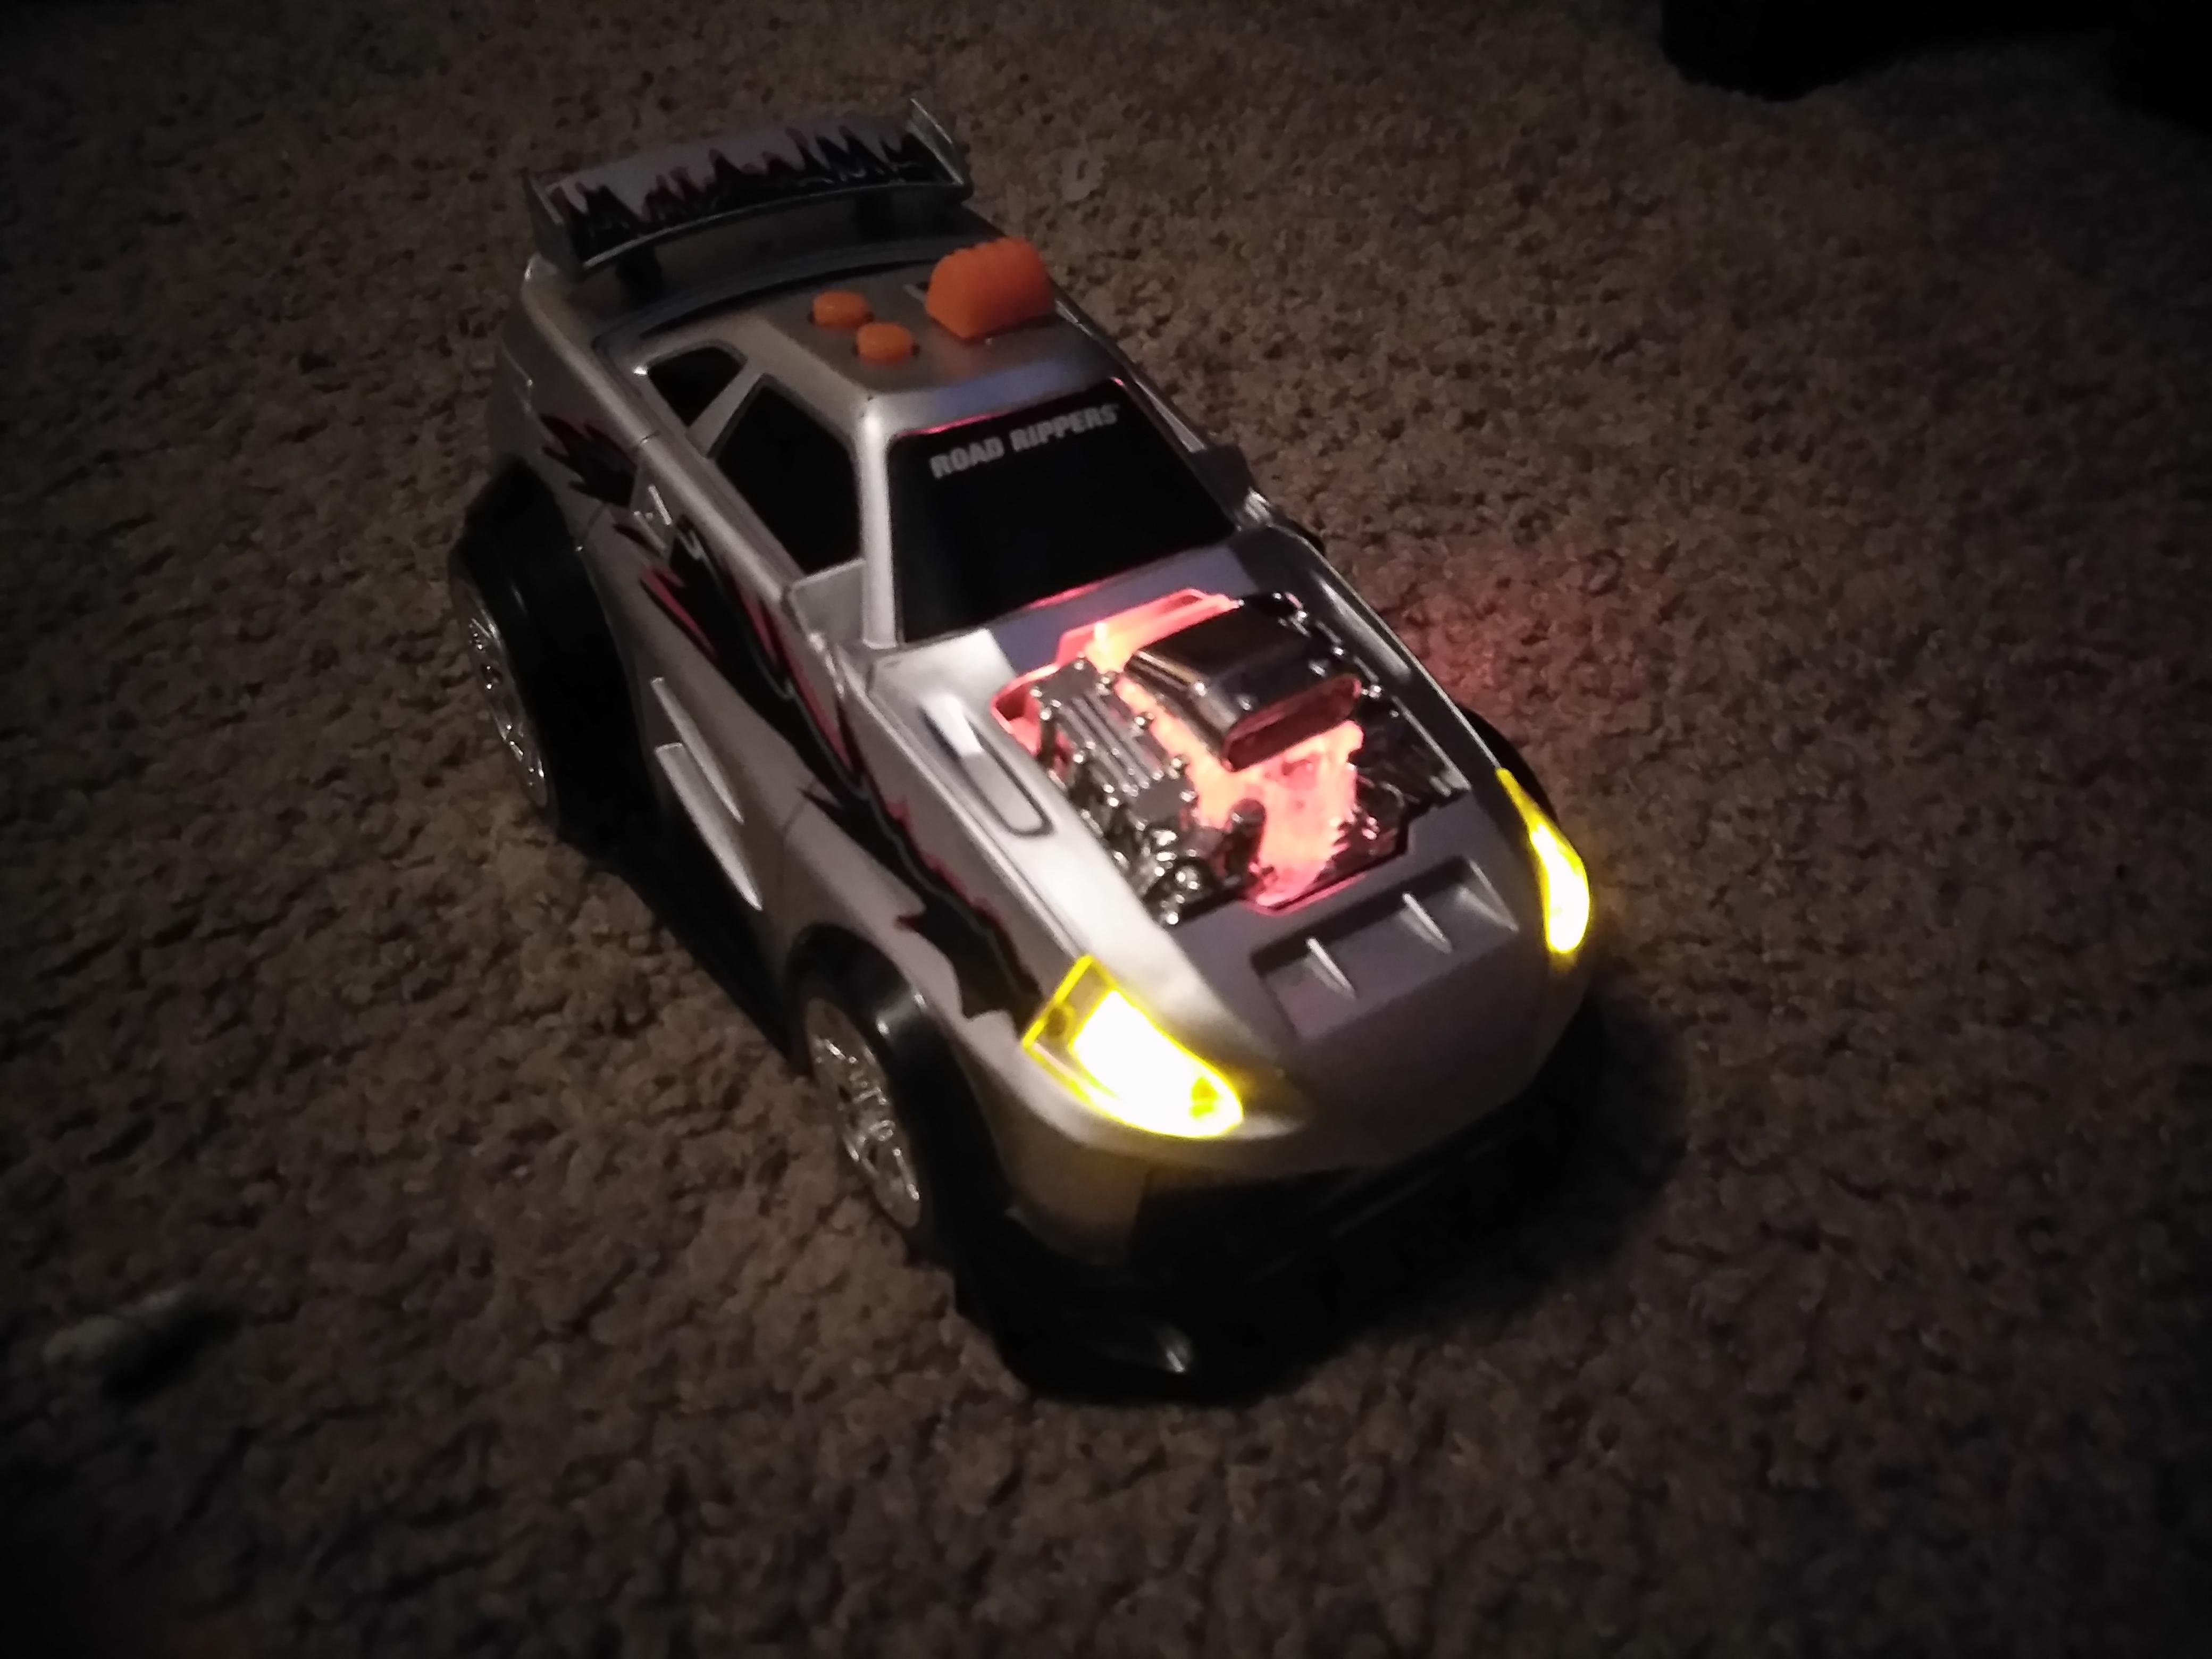 The haunted toy car from my toy car story : chillsnarrator